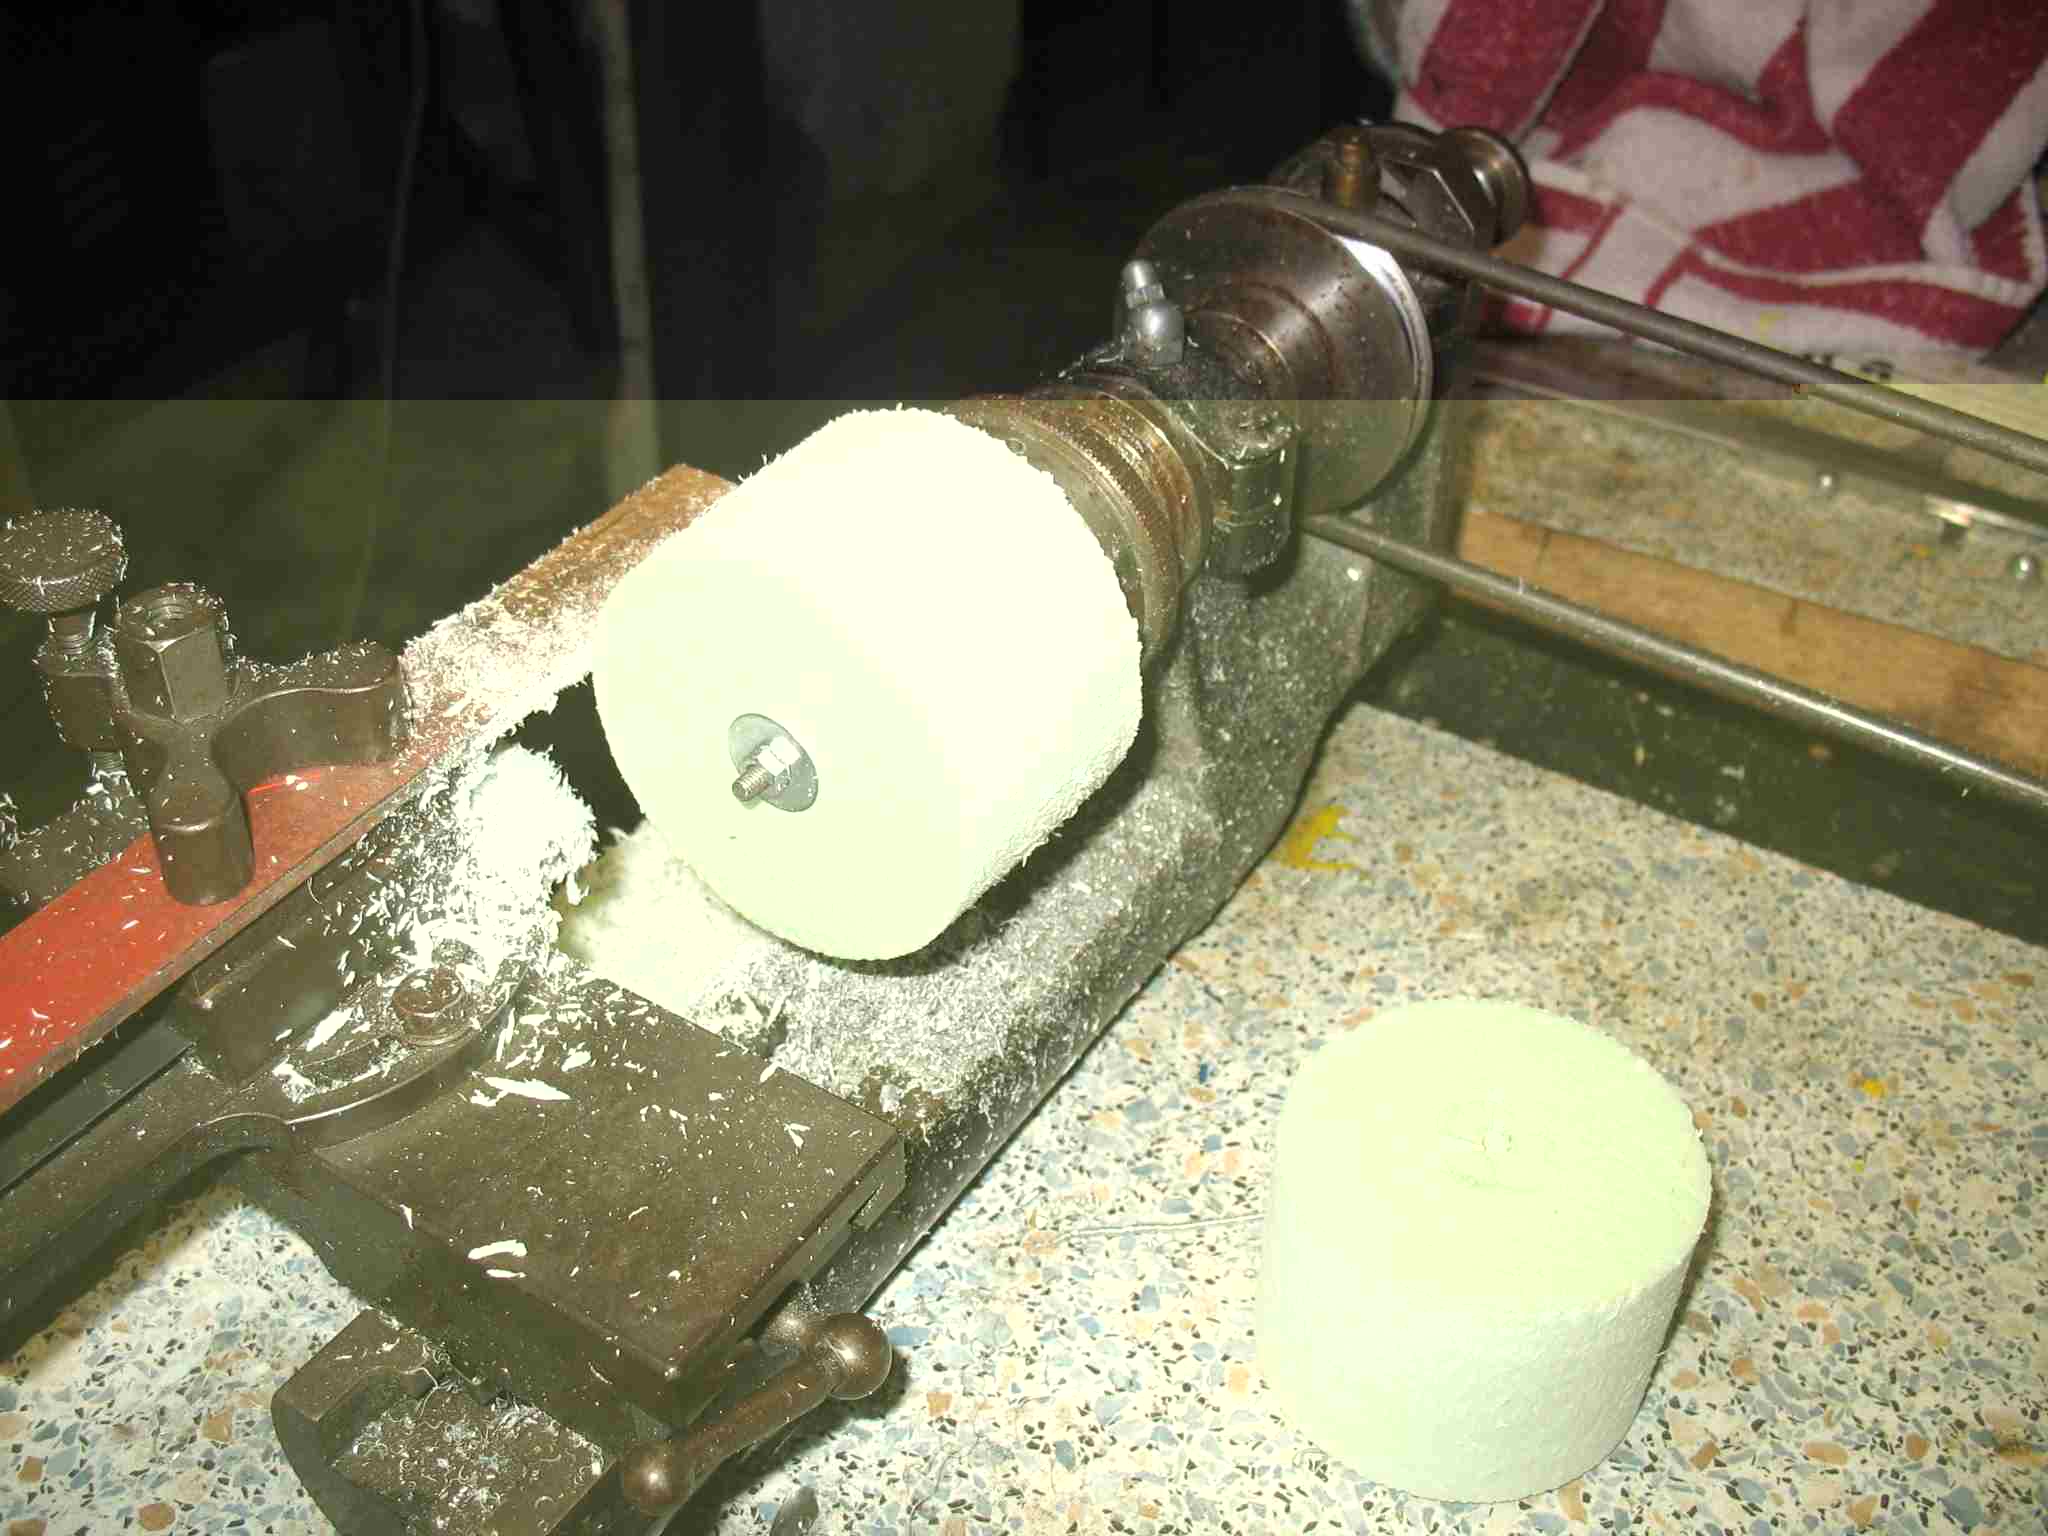 the piston consists of 3 sections of hard-foam and is milled on a little lathe